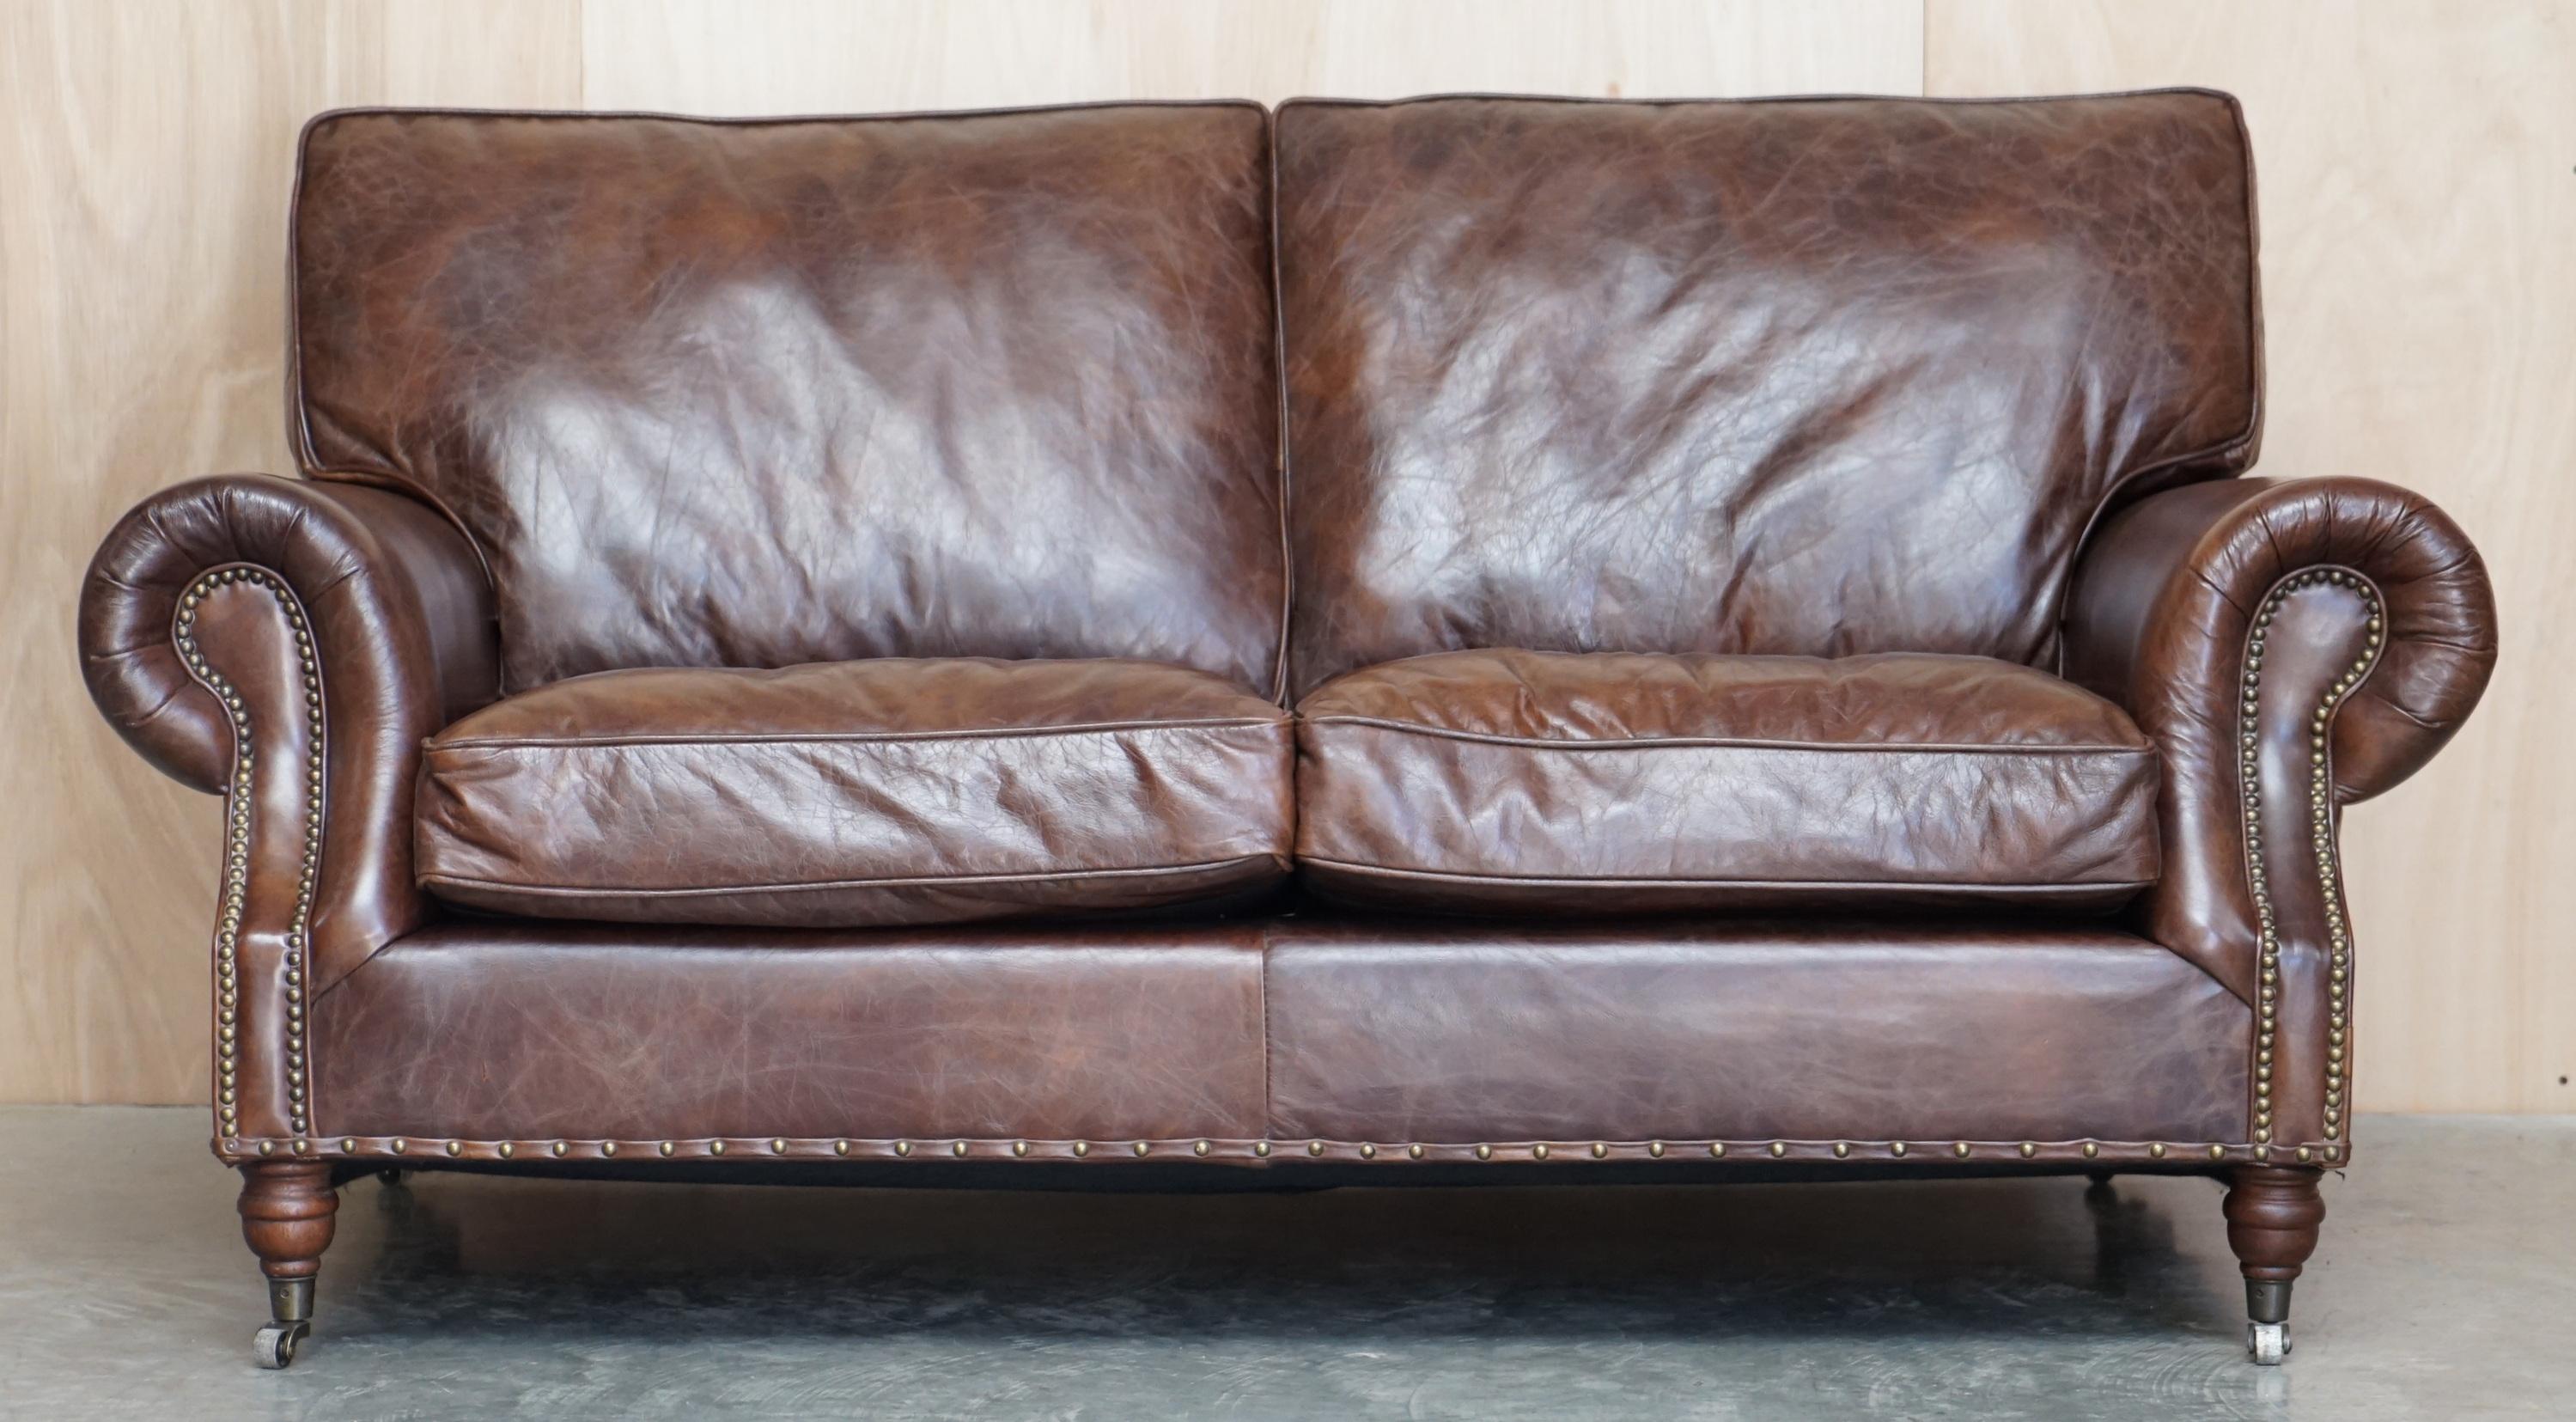 We are delighted to offer for sale this absolutely stunning original Timothy Oulton Balmoral hand dyed brown leather sofa

This sofa is the 2.5 seat version at 176cm wide which can seat upto three, I have the larger 204cm seat version listed under